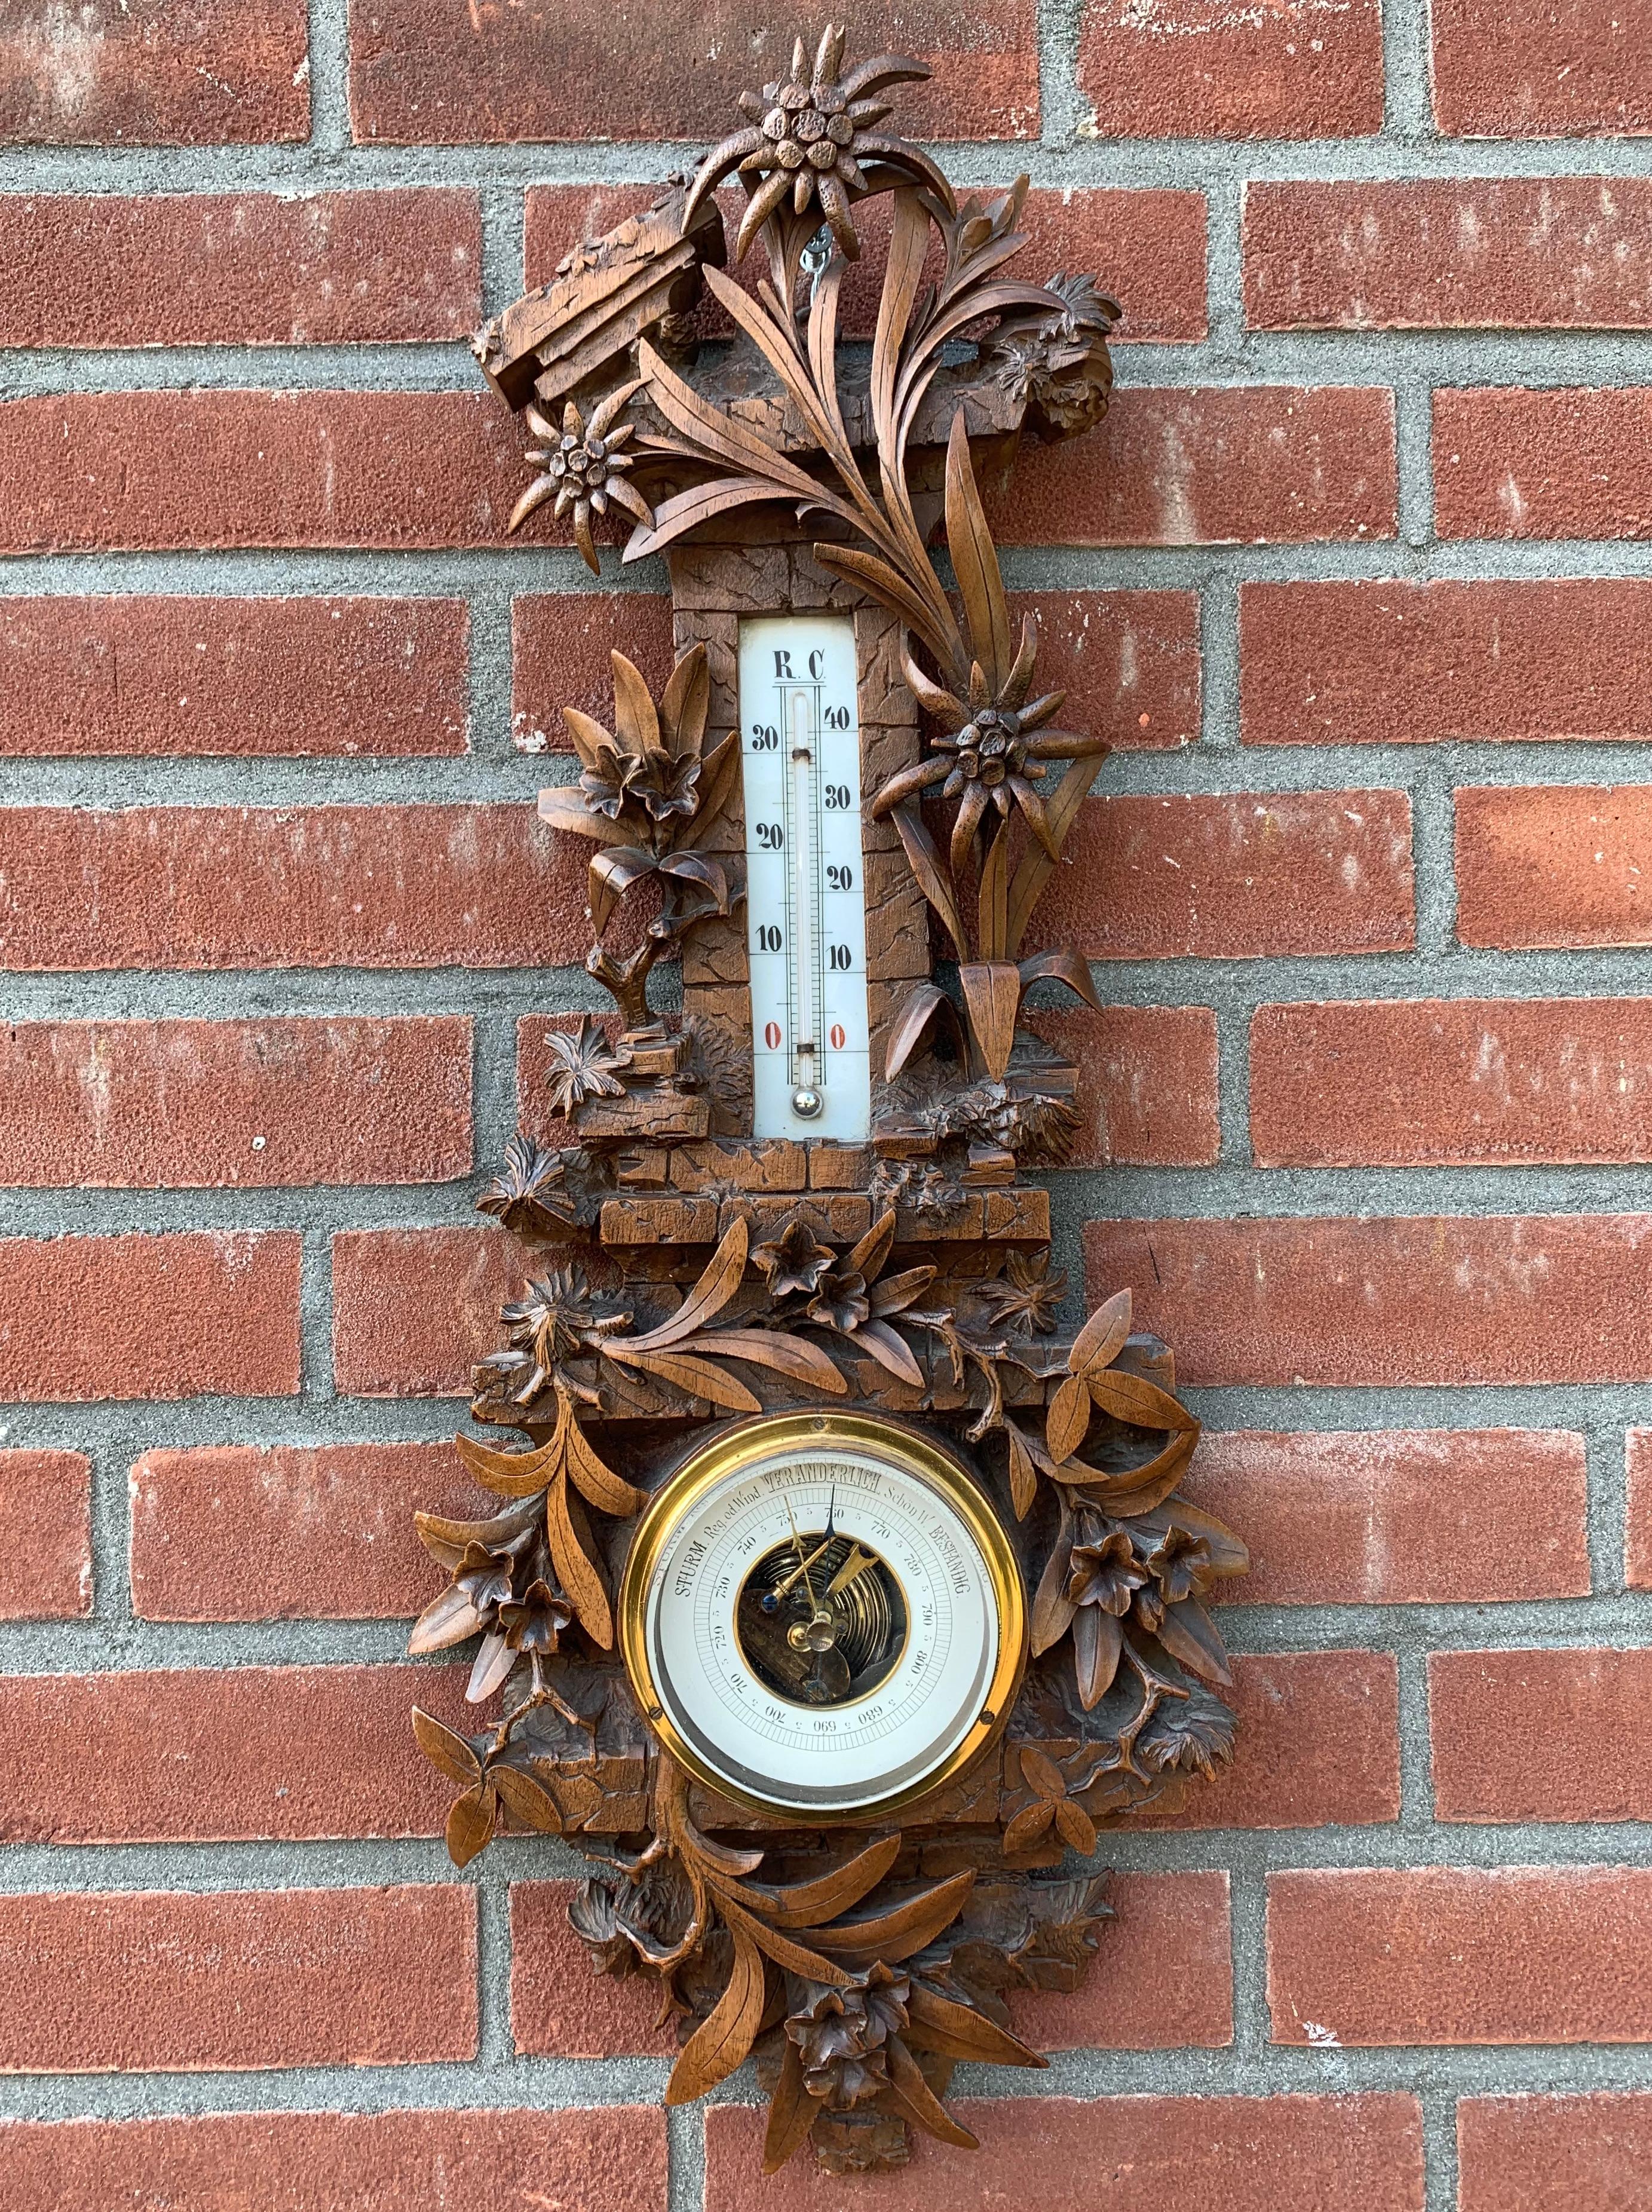 Top museum quality carved Swiss barometer / weather station

This antique barometer is not only about the actuality of the weather, it is also a true work of art and a real pleasure to look at. The attention to detail is incredible and it must have